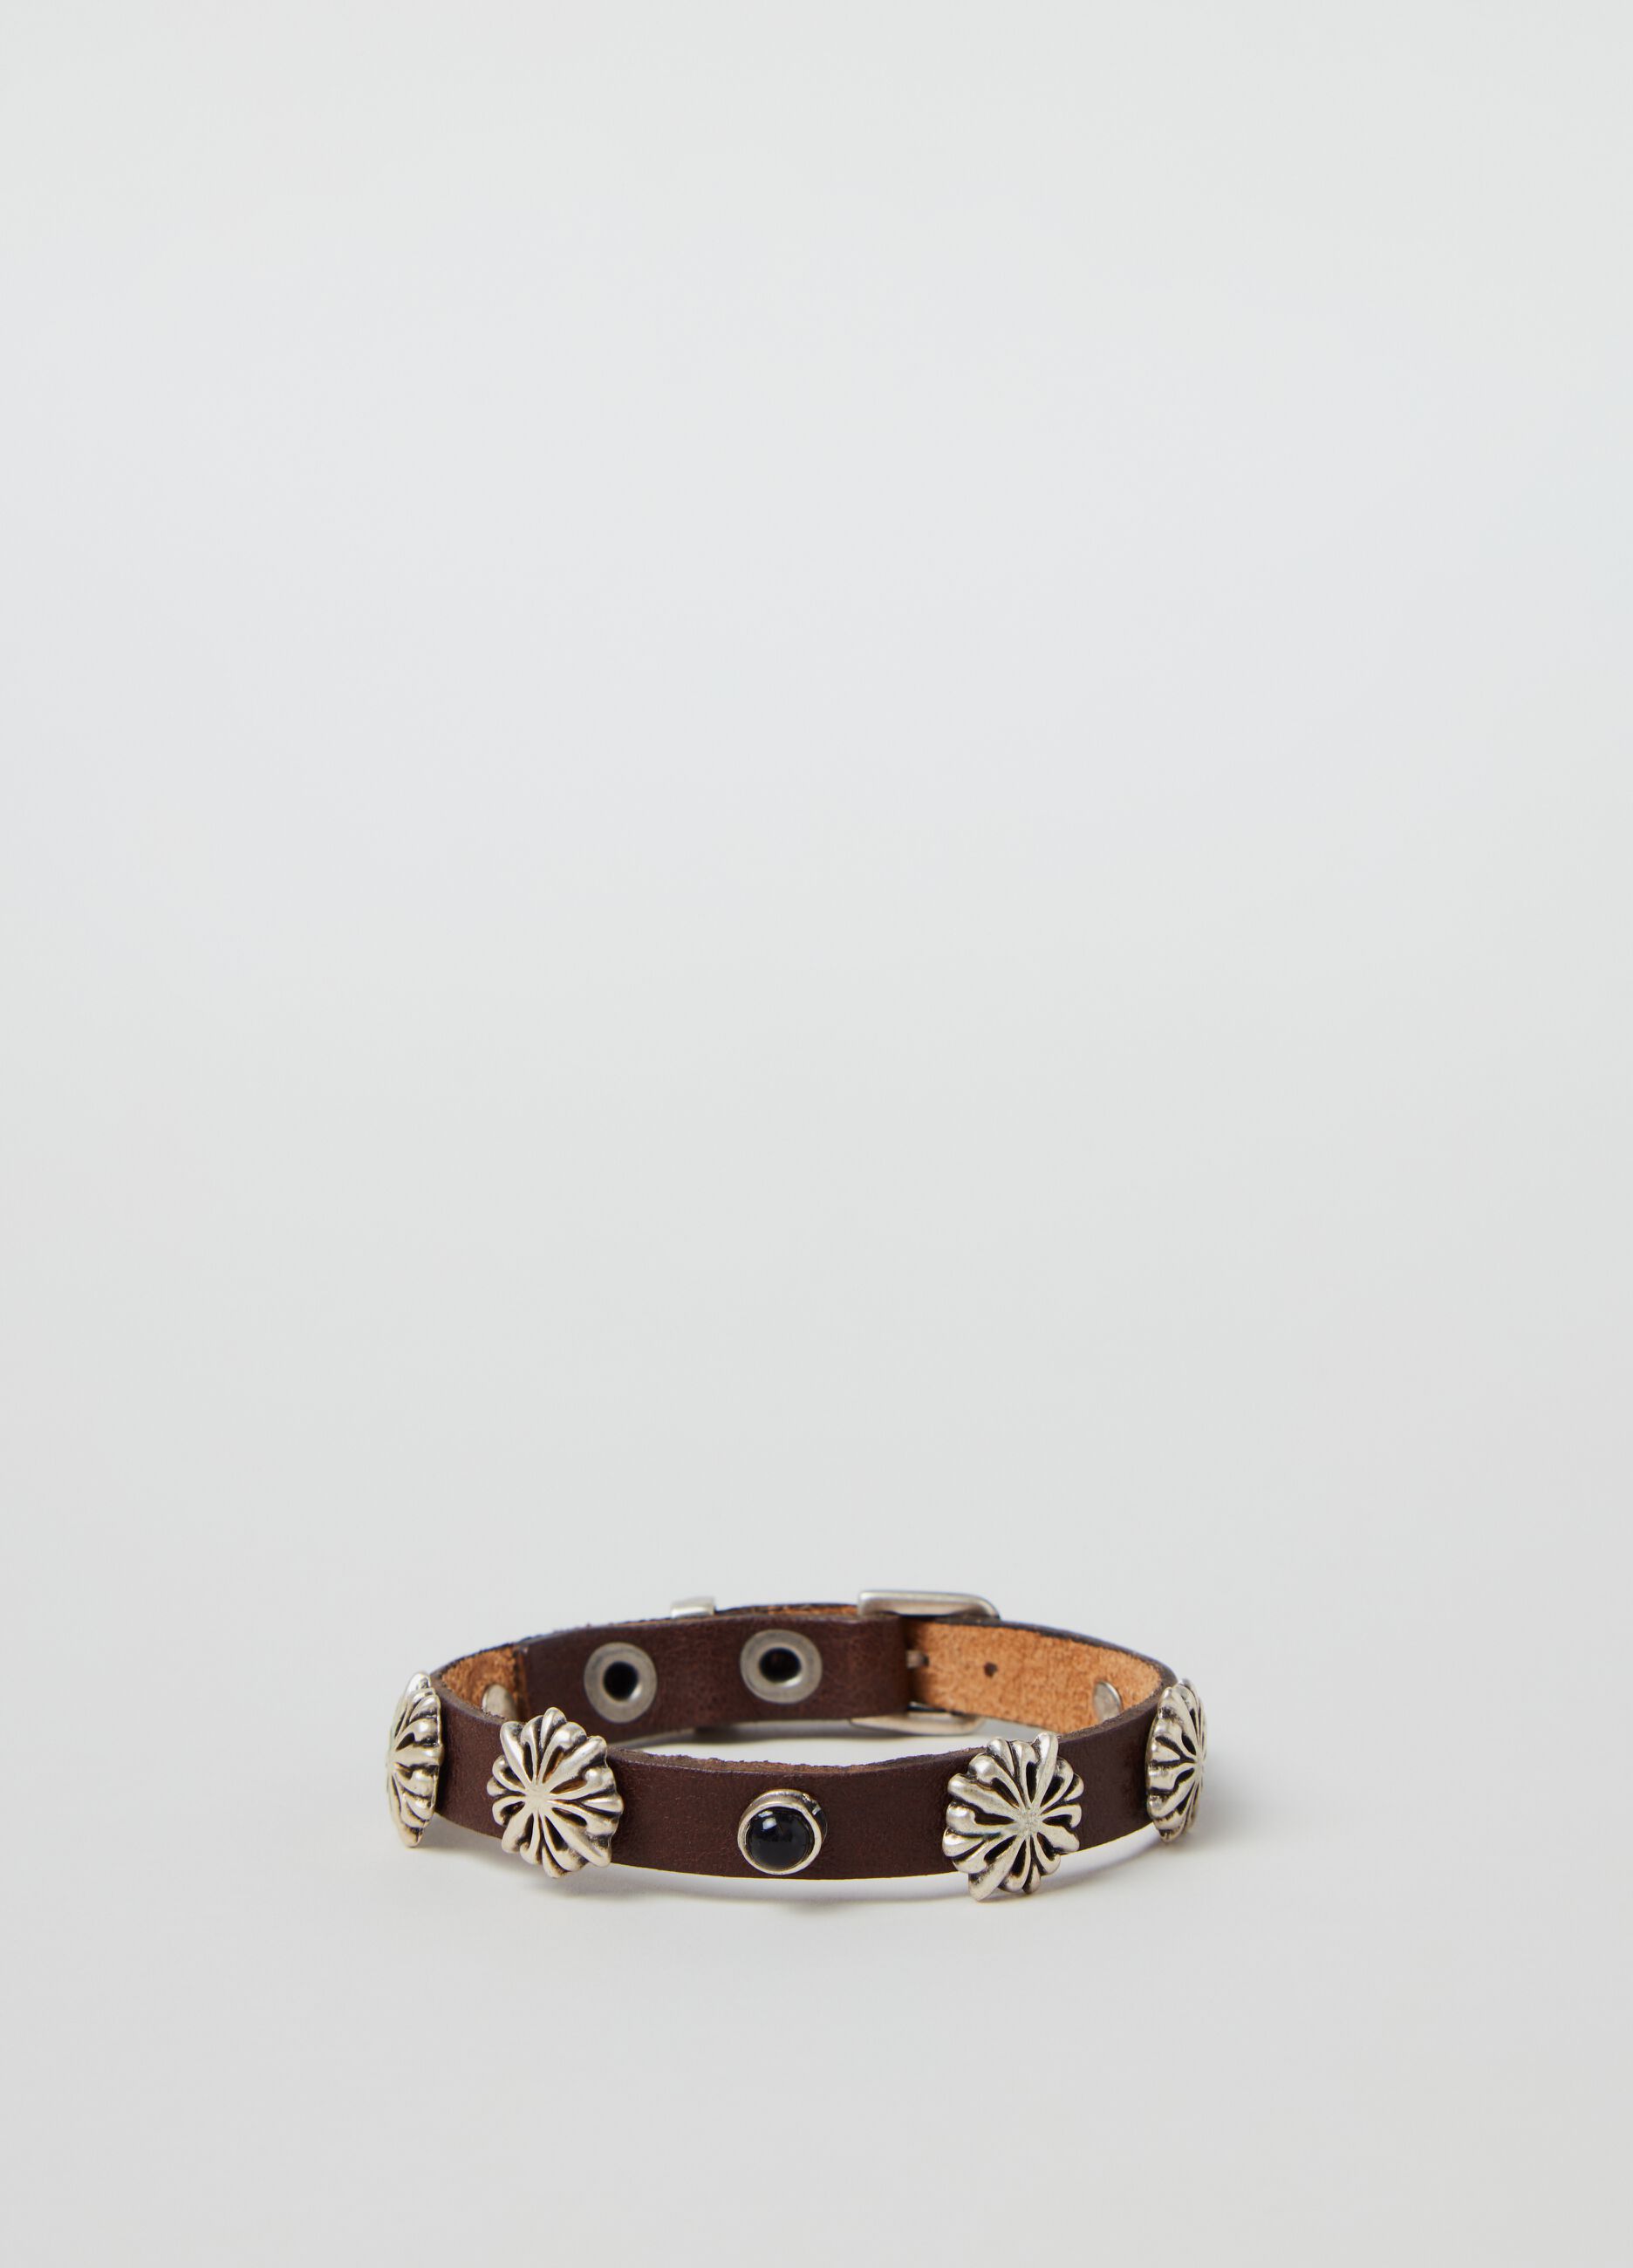 PIOMBO Man's Leather Brown Leather bracelet with |